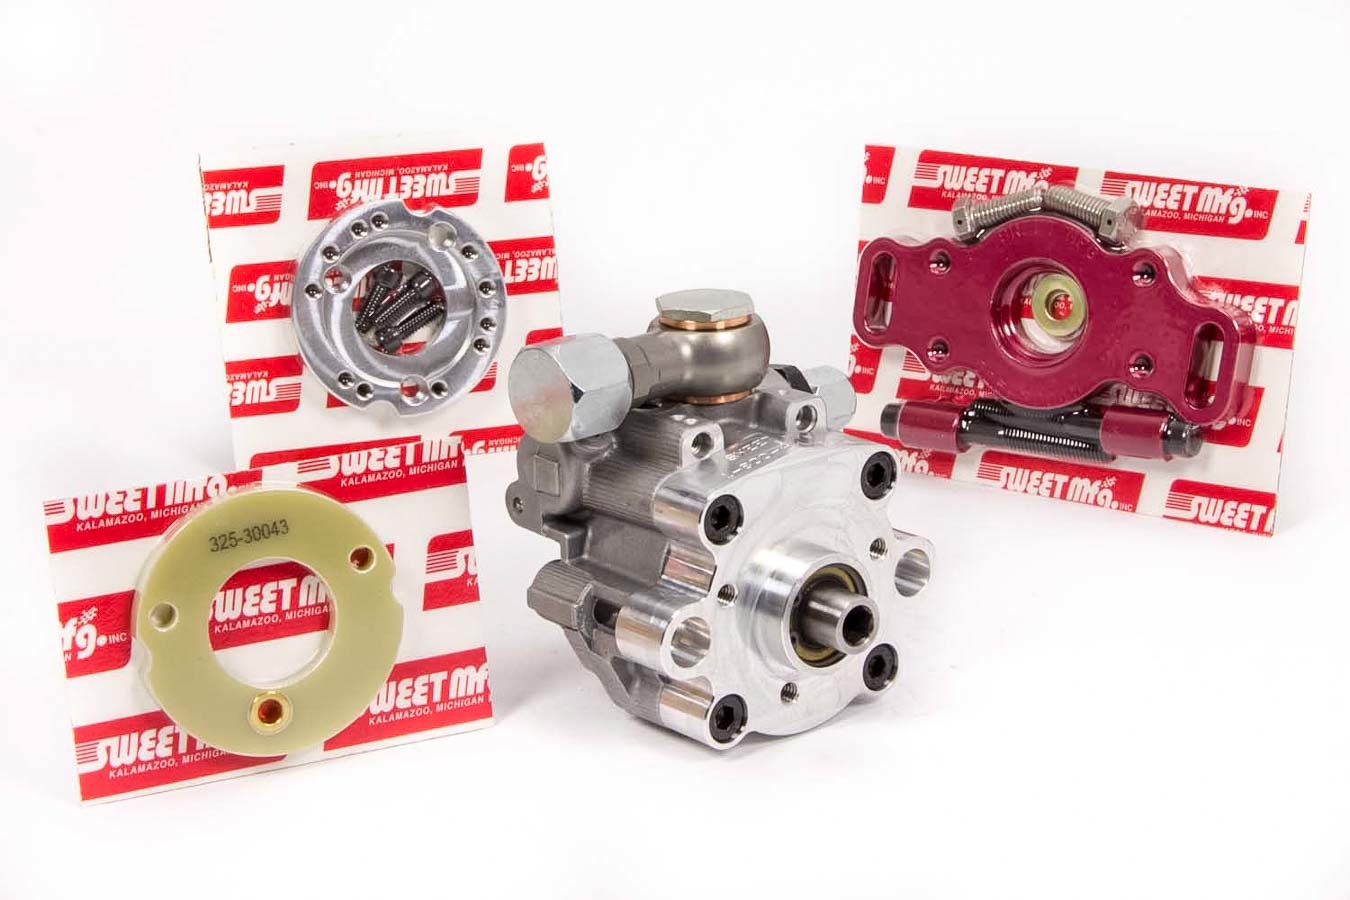 Sweet Manufacturing 306-10300 Power Steering Pump, Aluminum Housing, Spacers / Bolts Included, Aluminum, Red Anodized, Sprint Car, Each